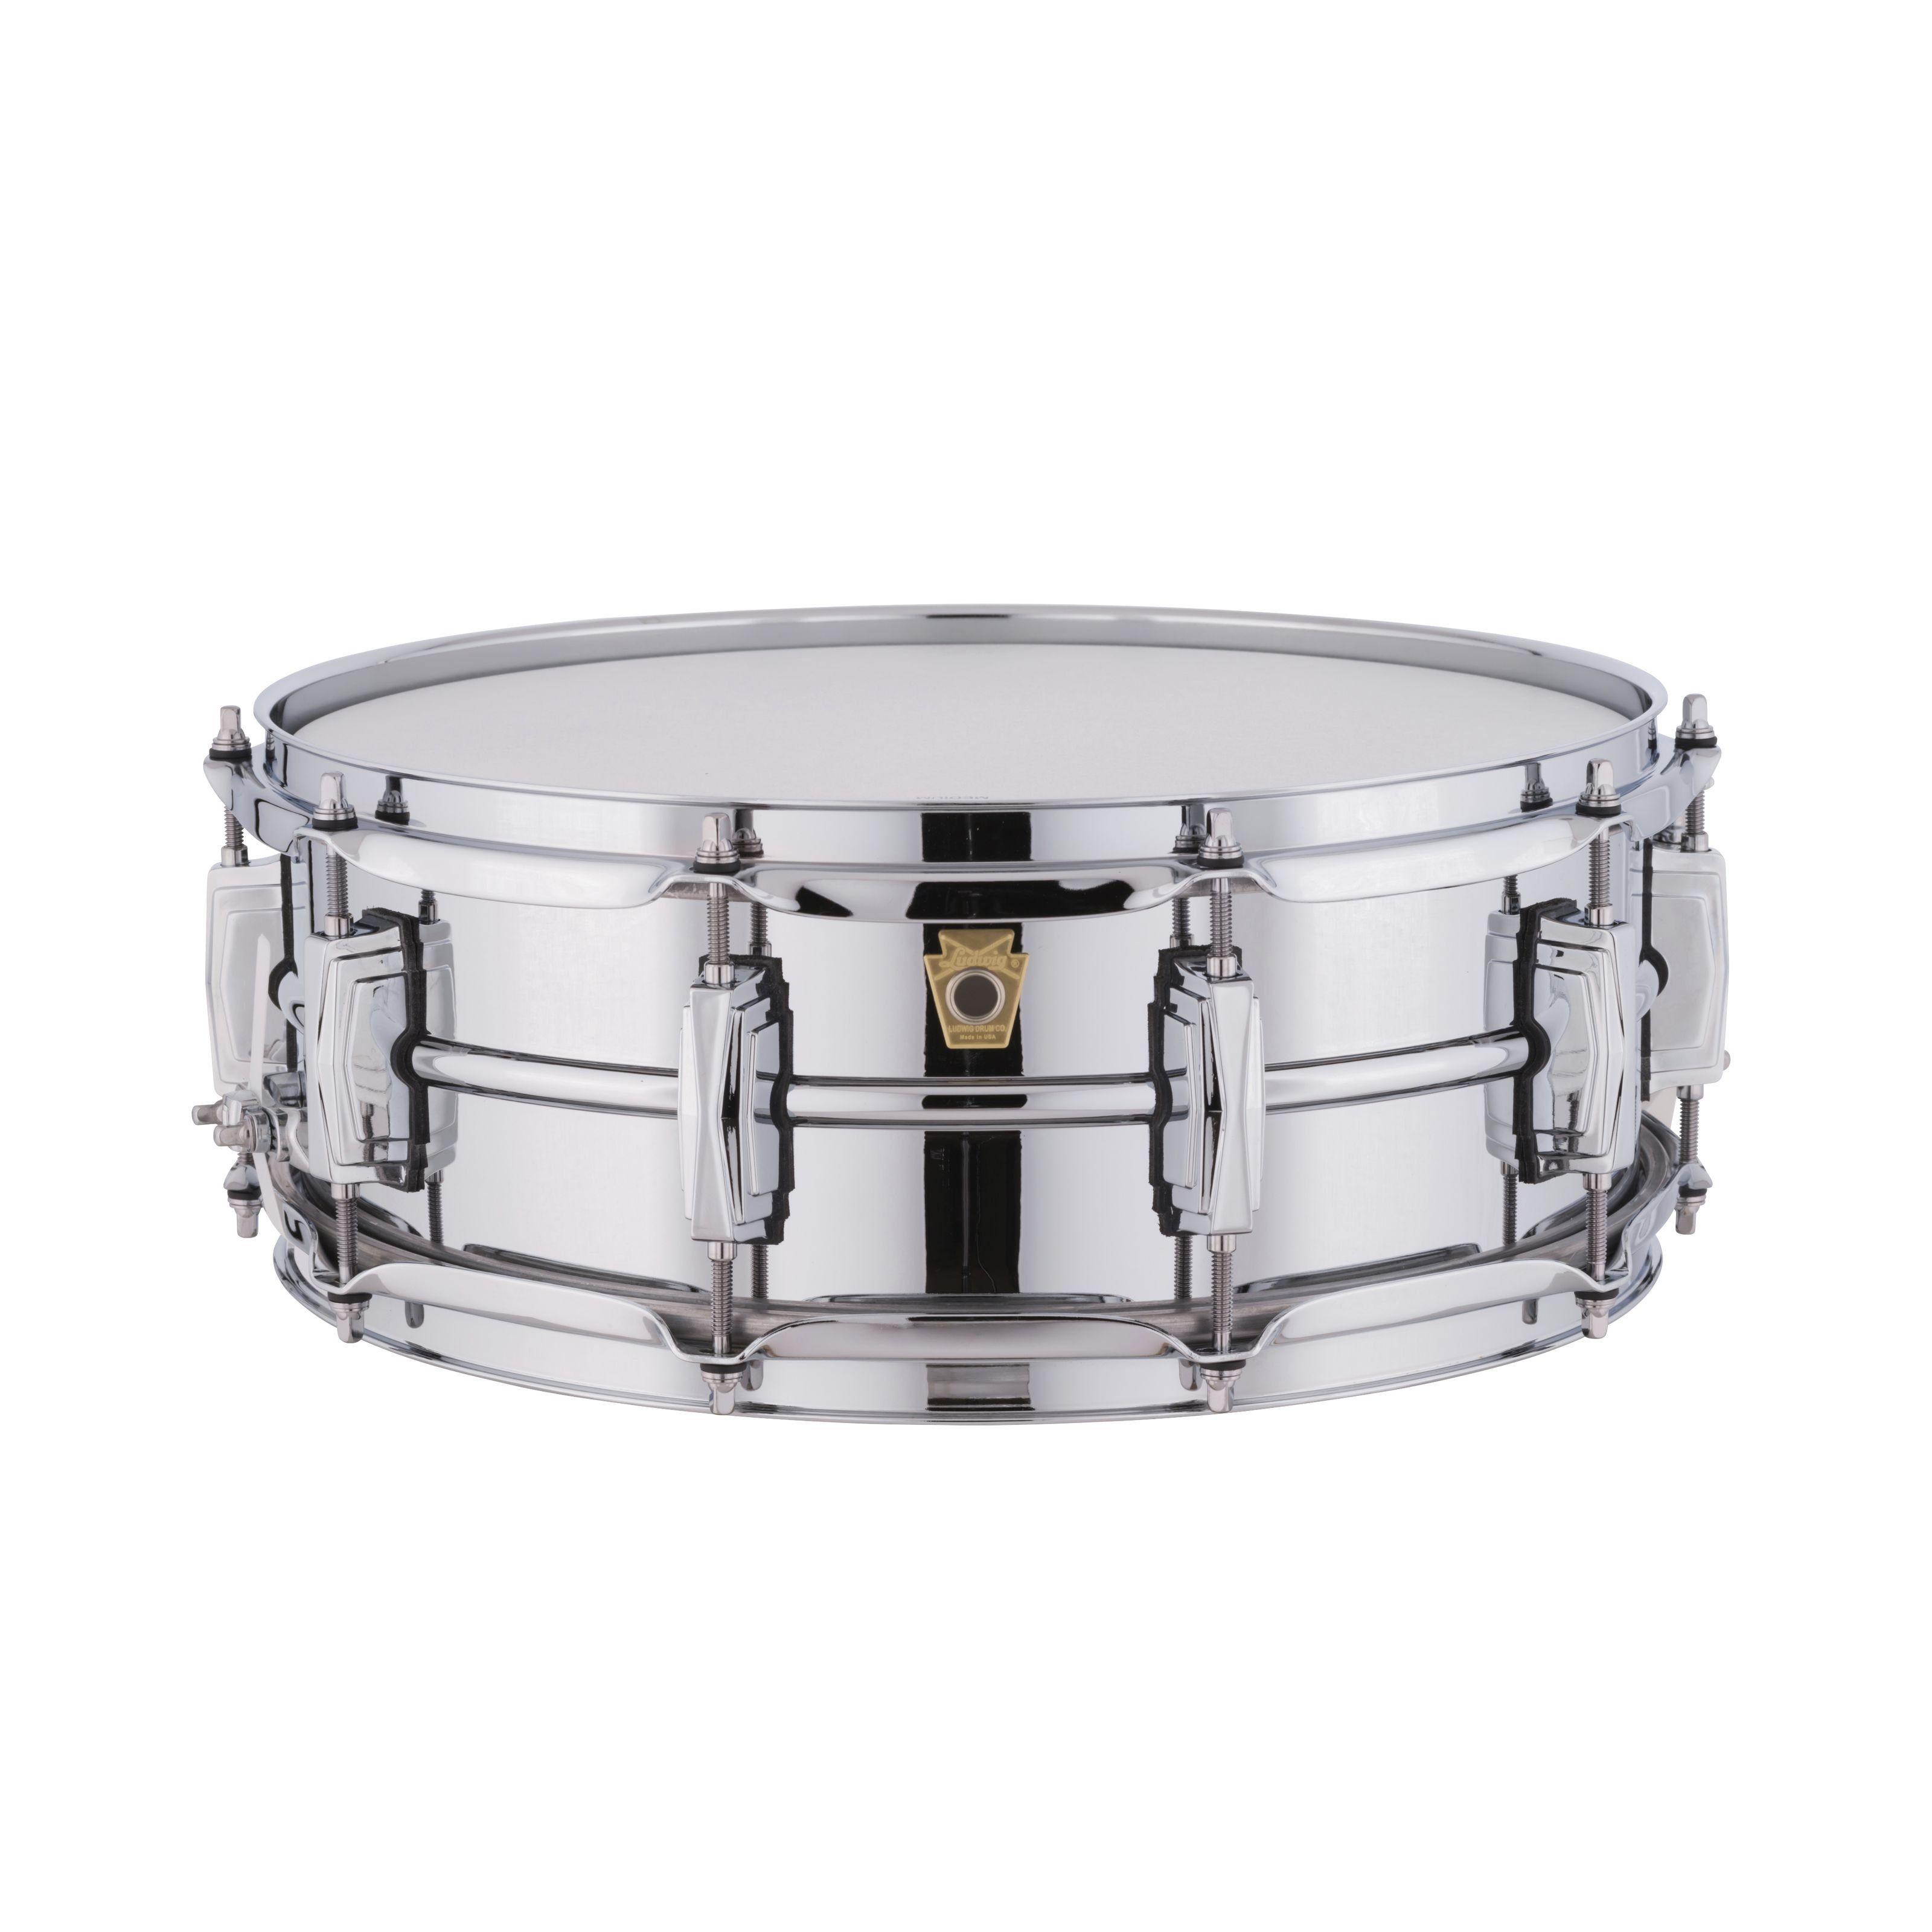 Ludwig Snare Drum,Supraphonic Snare 14"x5" LM400 Chrome over Aluminium, Schlagzeuge, Snare Drums, Supraphonic Snare 14"x5" LM400 Chrome over Aluminium - Snare Drum